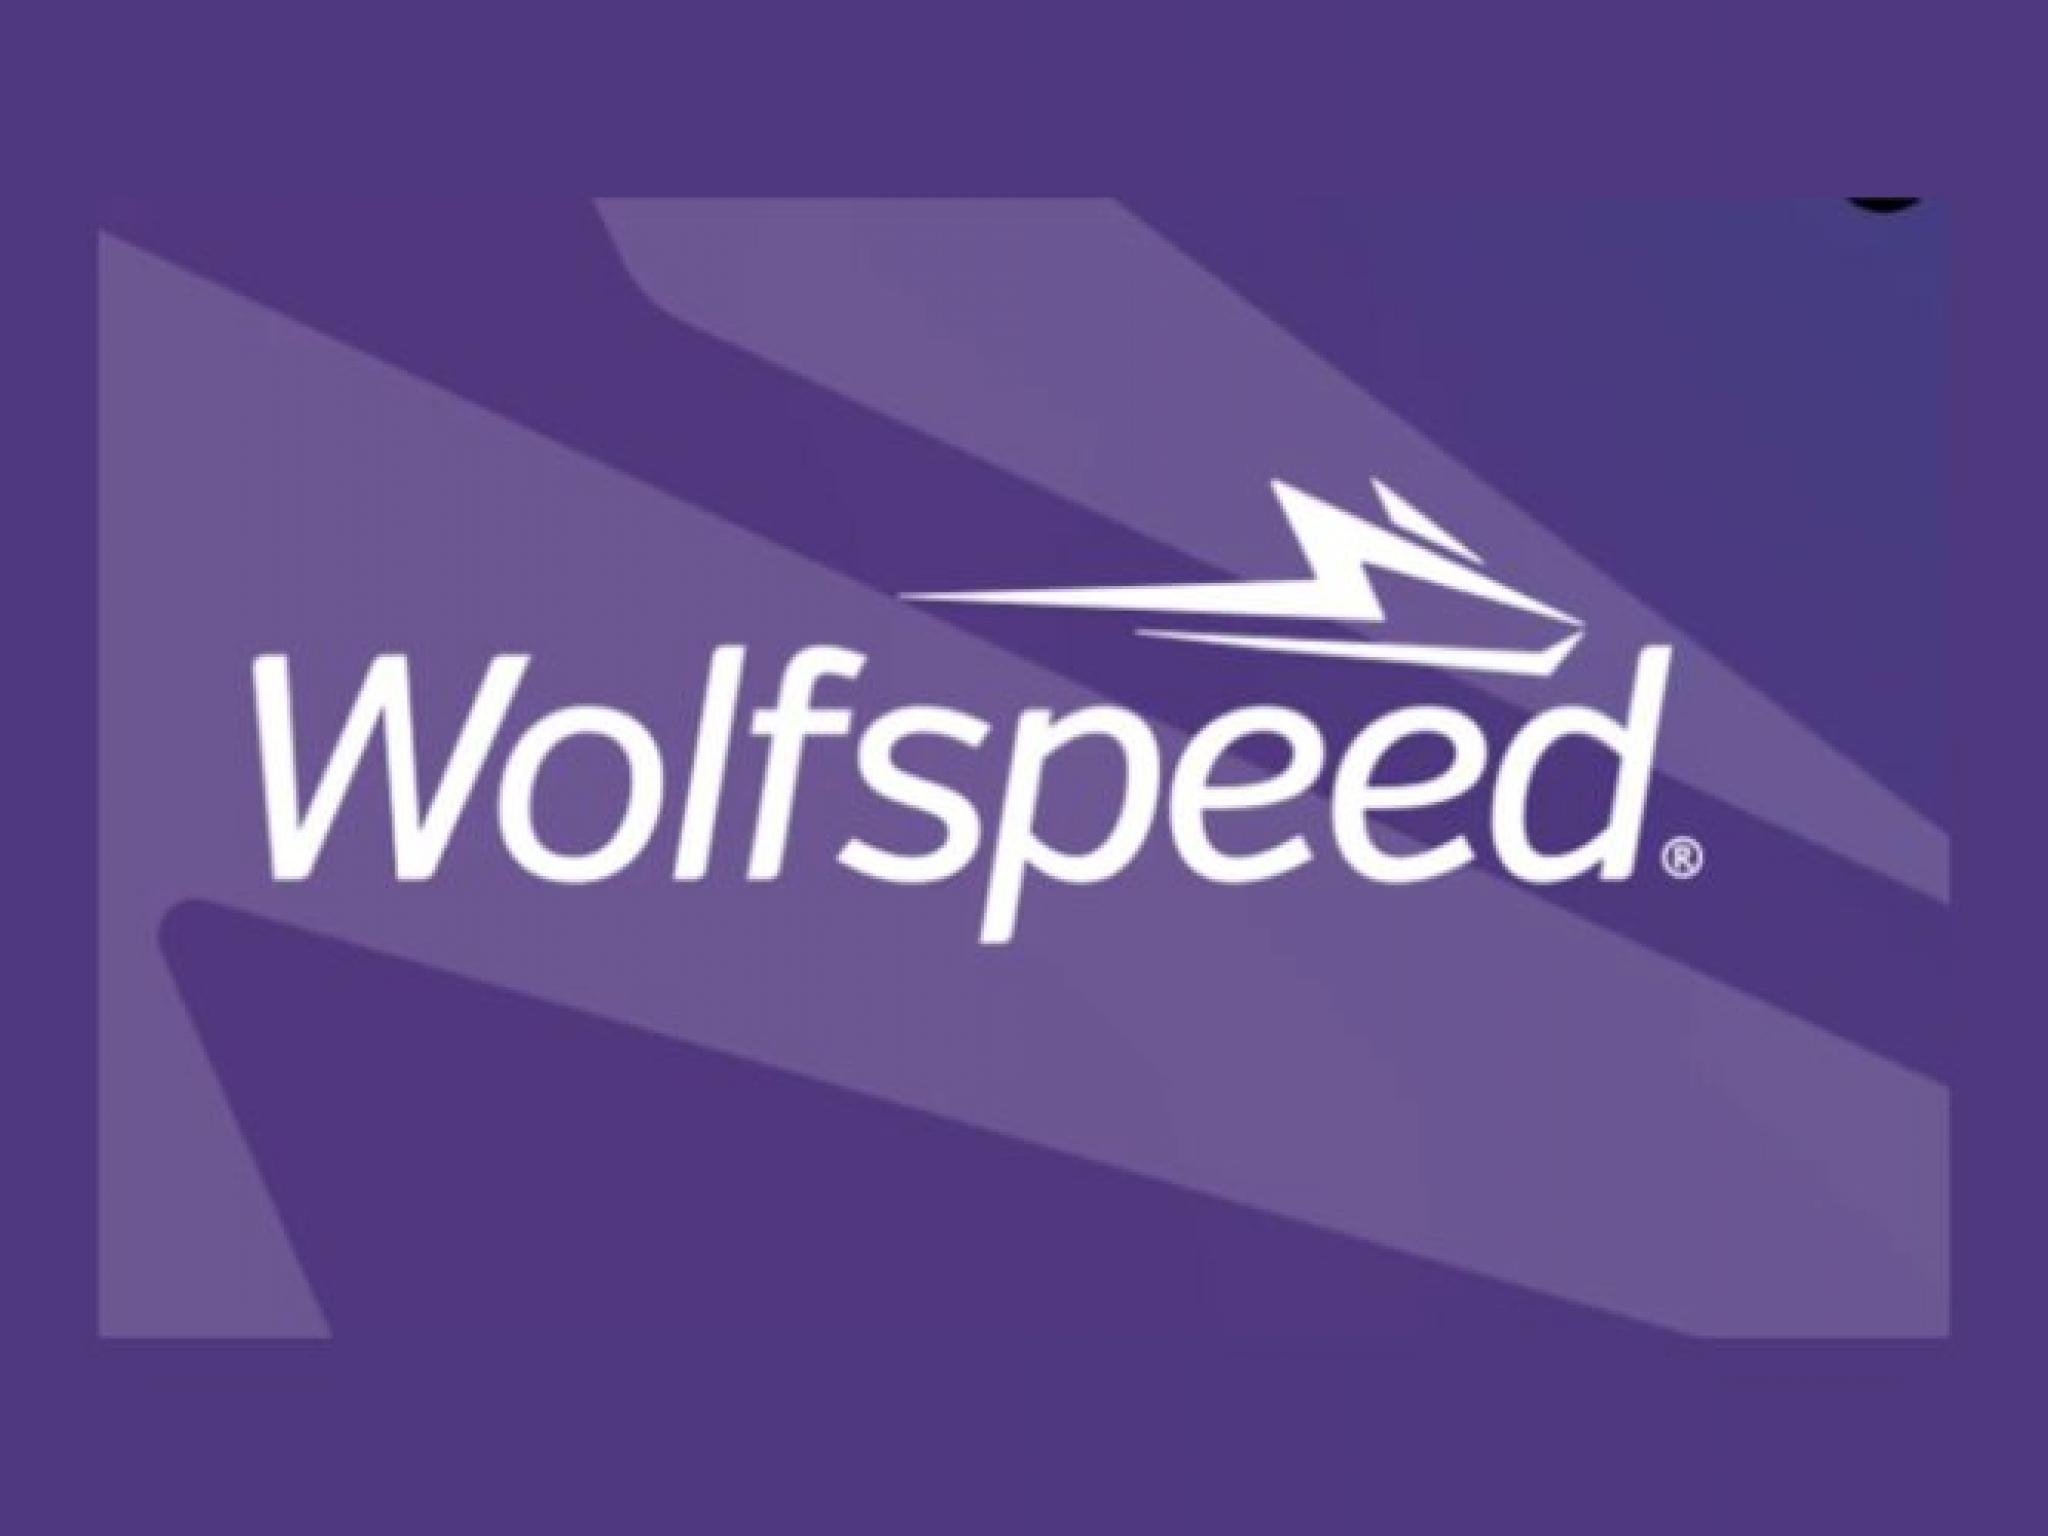  whats-going-on-with-wolfspeed-stock-thursday 